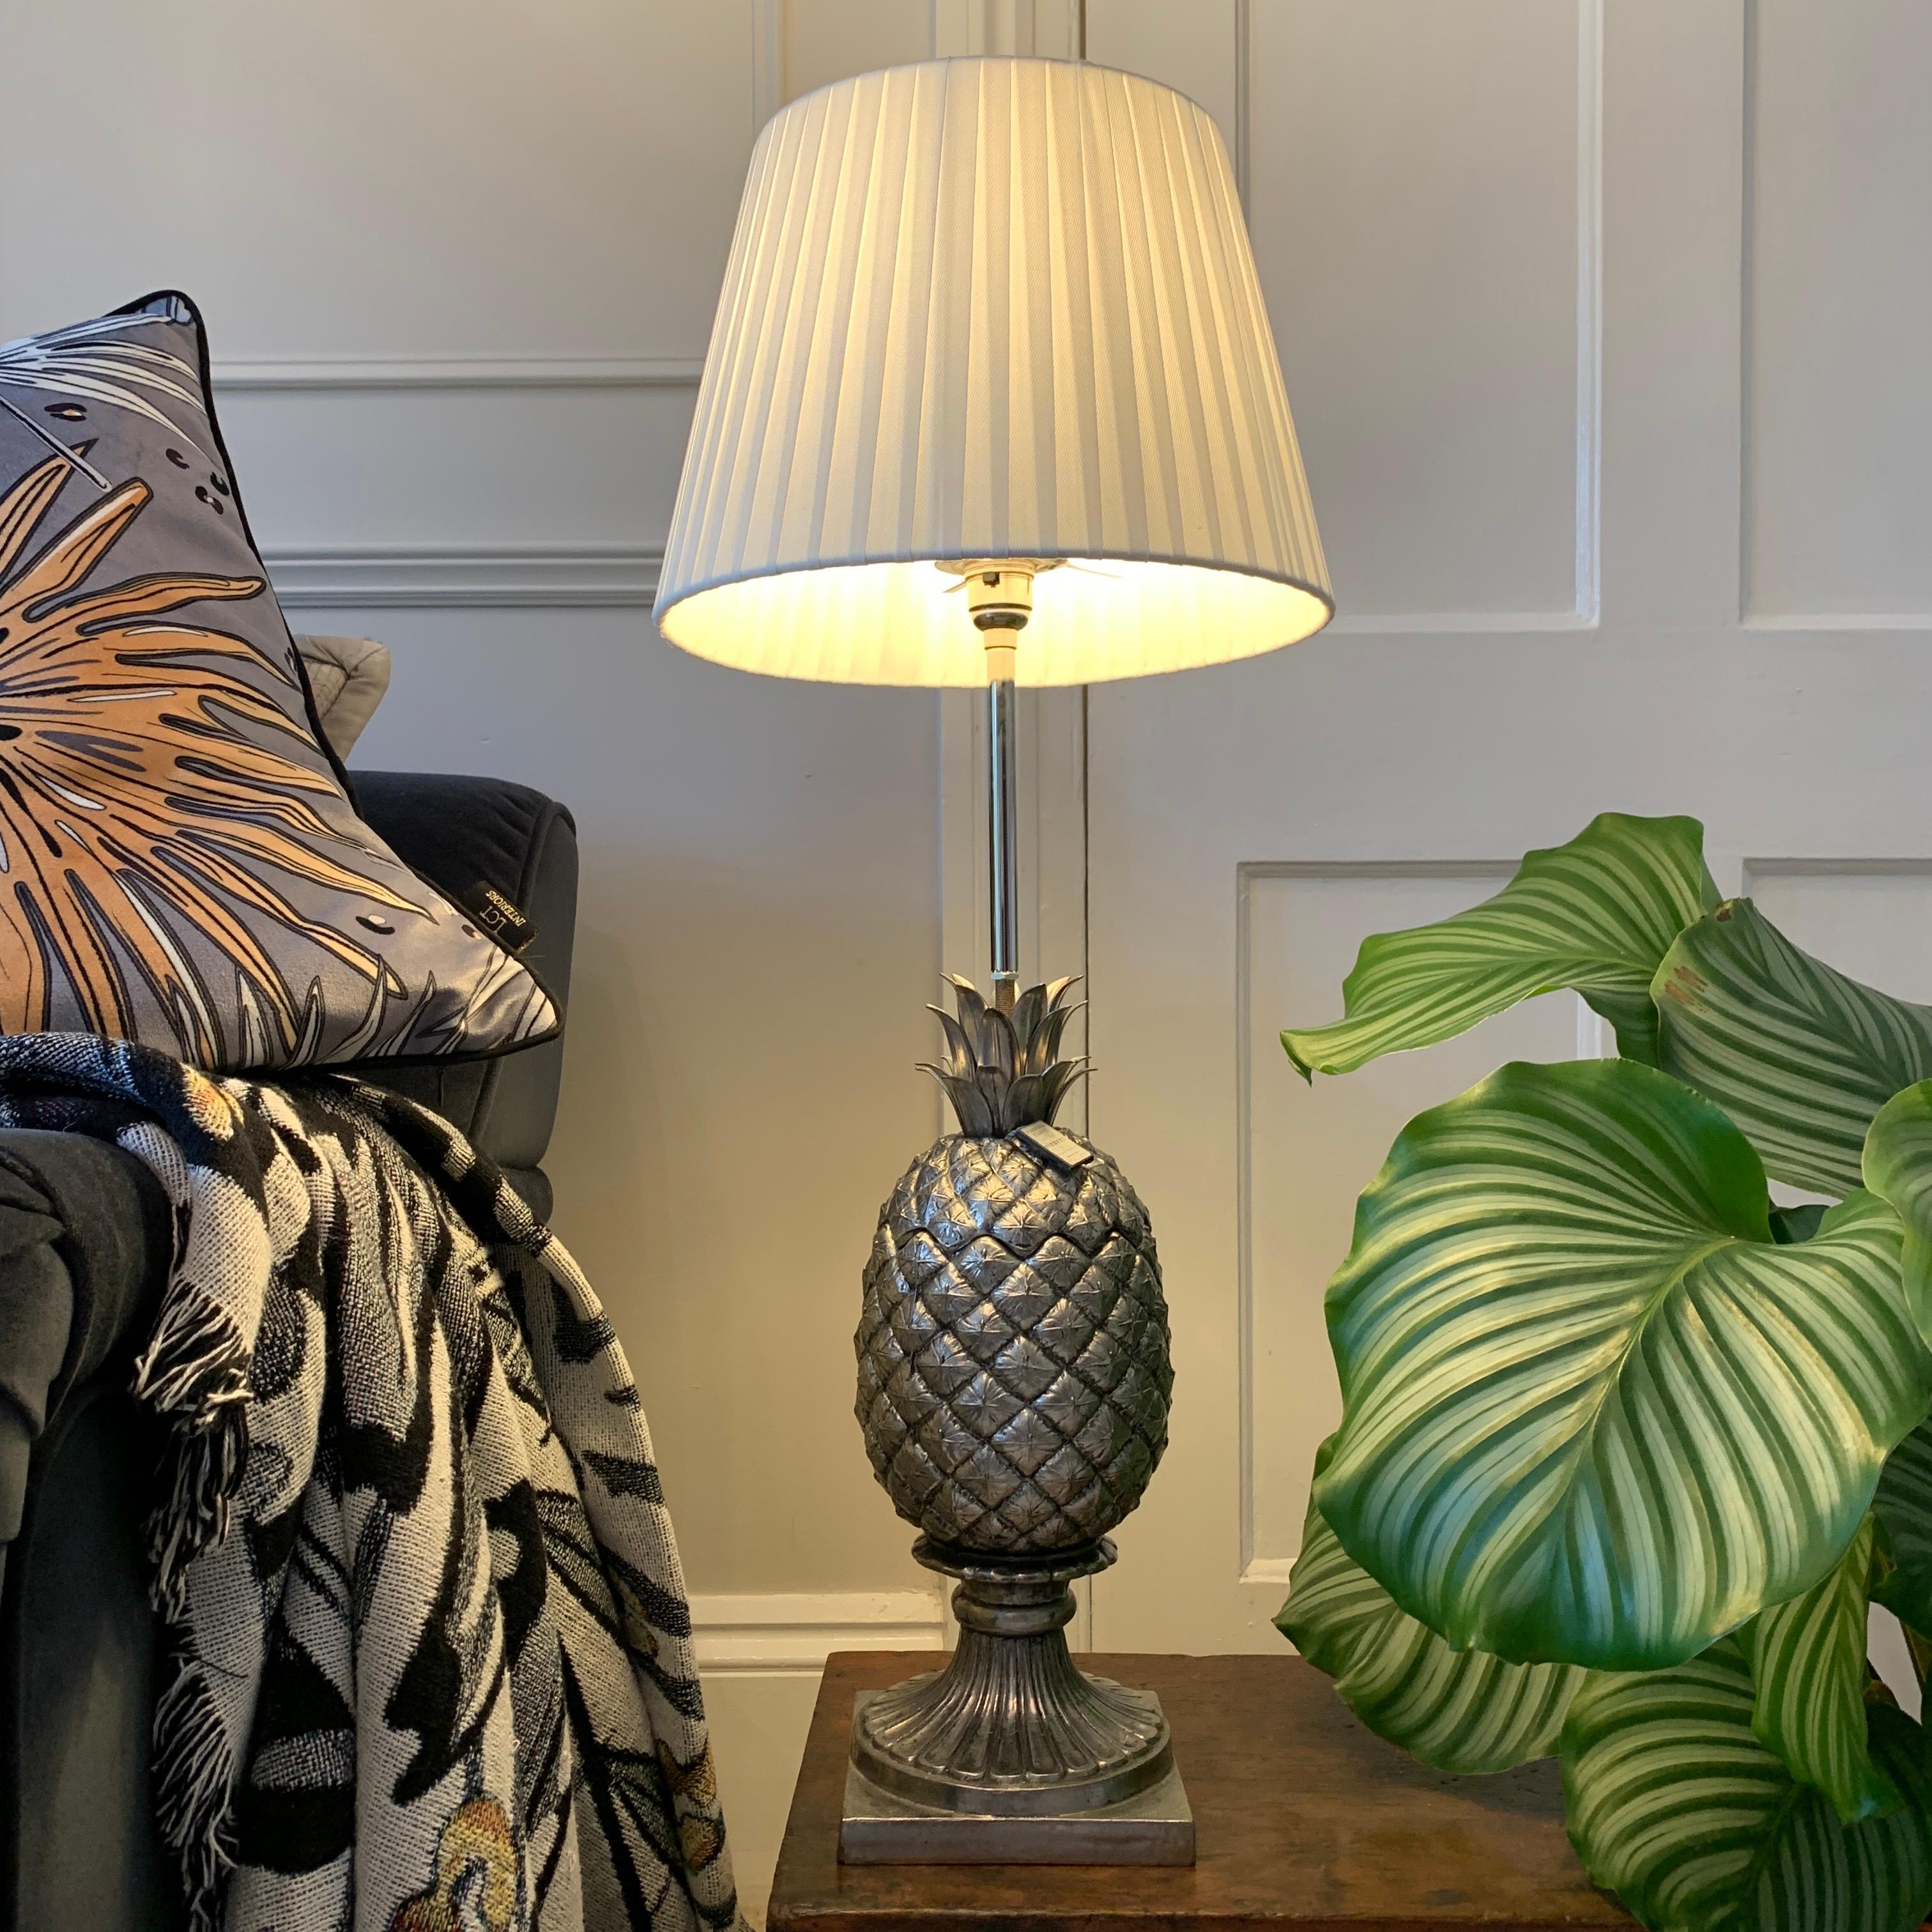 Fabulous super rare silver pineapple table lamp by Mauro Manetti, Italy c'1960's. This stunning lamp has its original silver finish and Manetti swing tag tied around the fronds. The Lamp is also stamped M/M Italy on the top corner of the base. Mauro